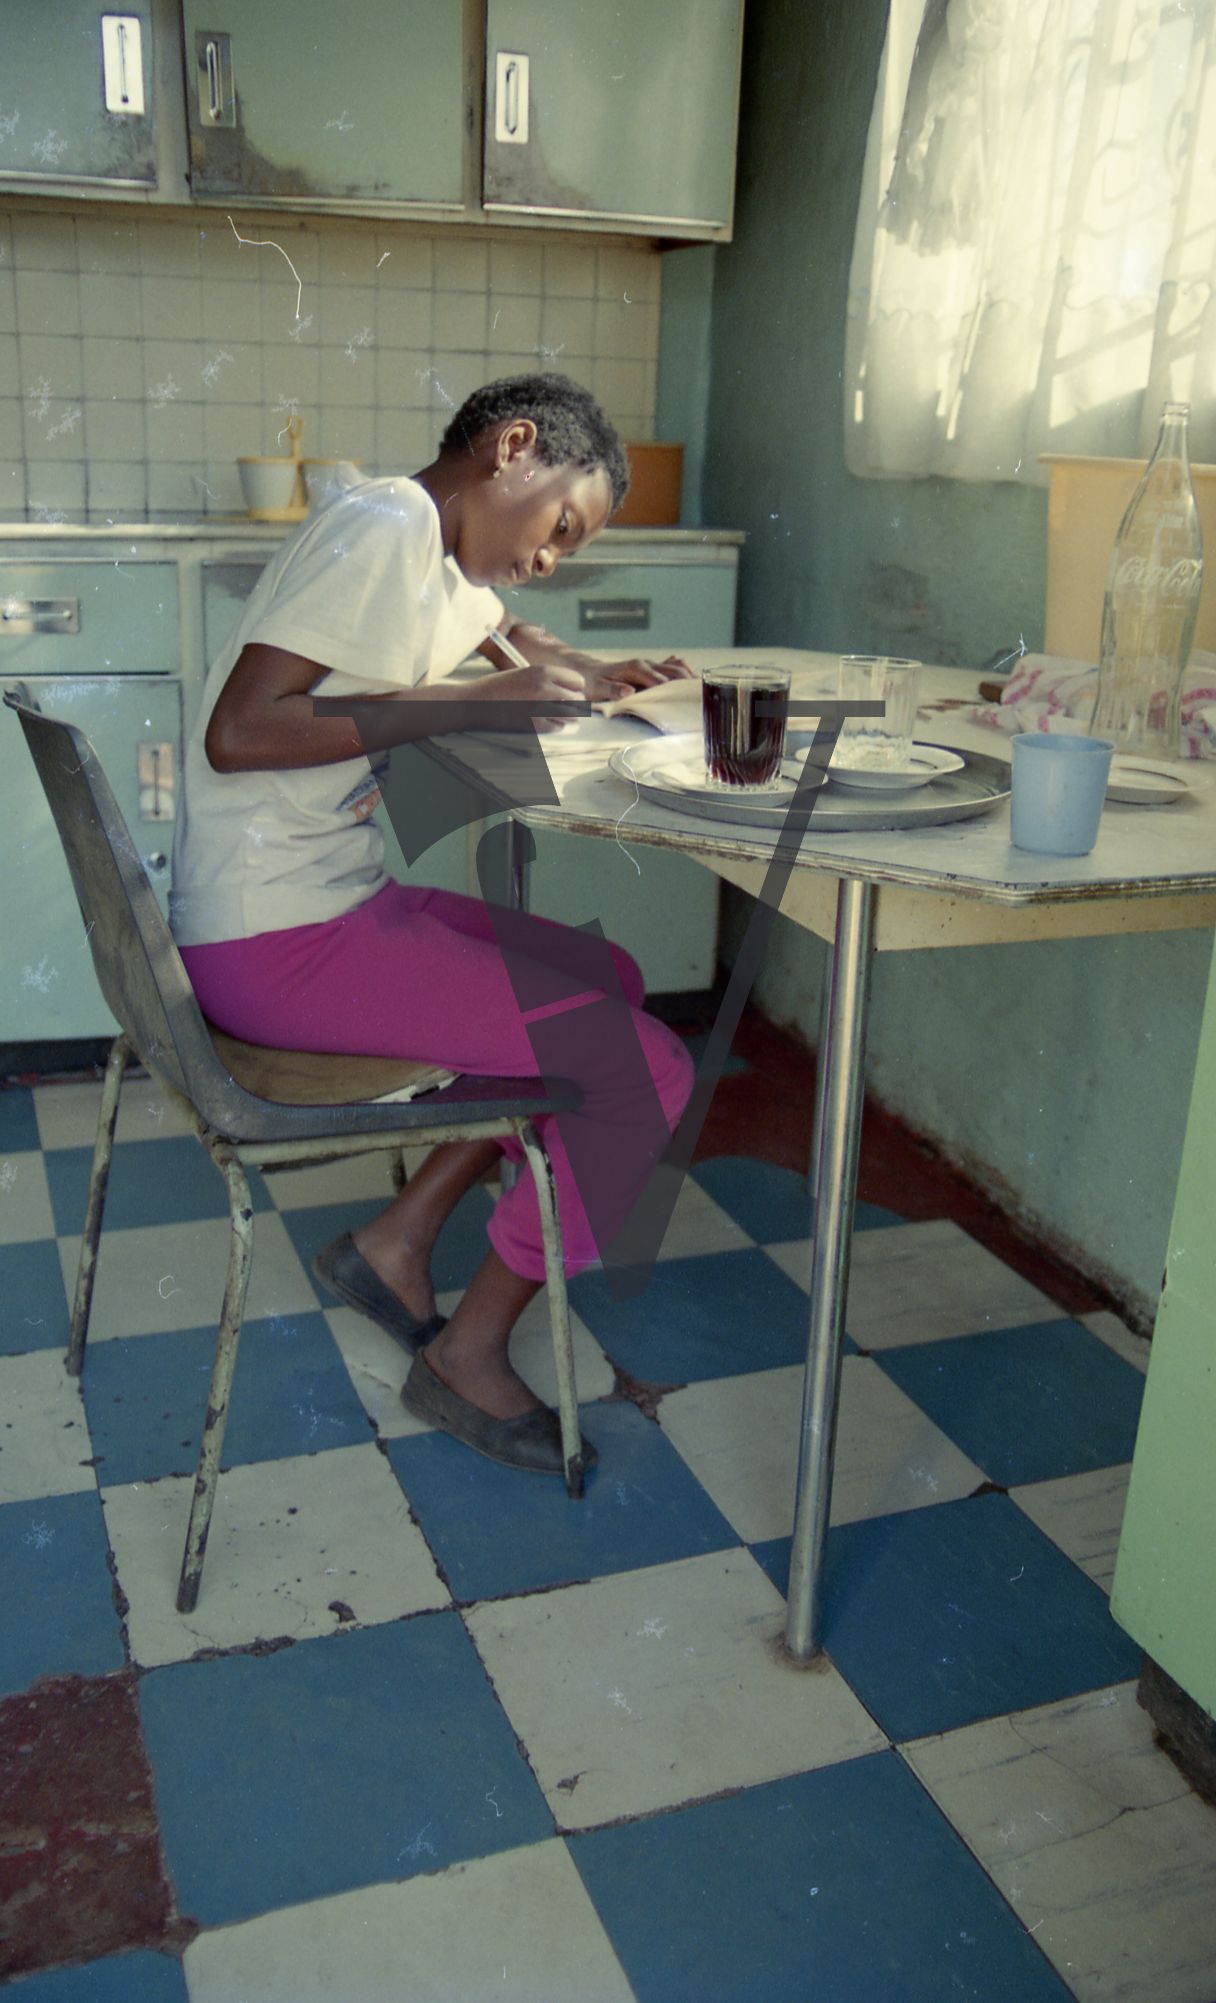 South Africa, Soweto, township, girl doing homework at kitchen table.